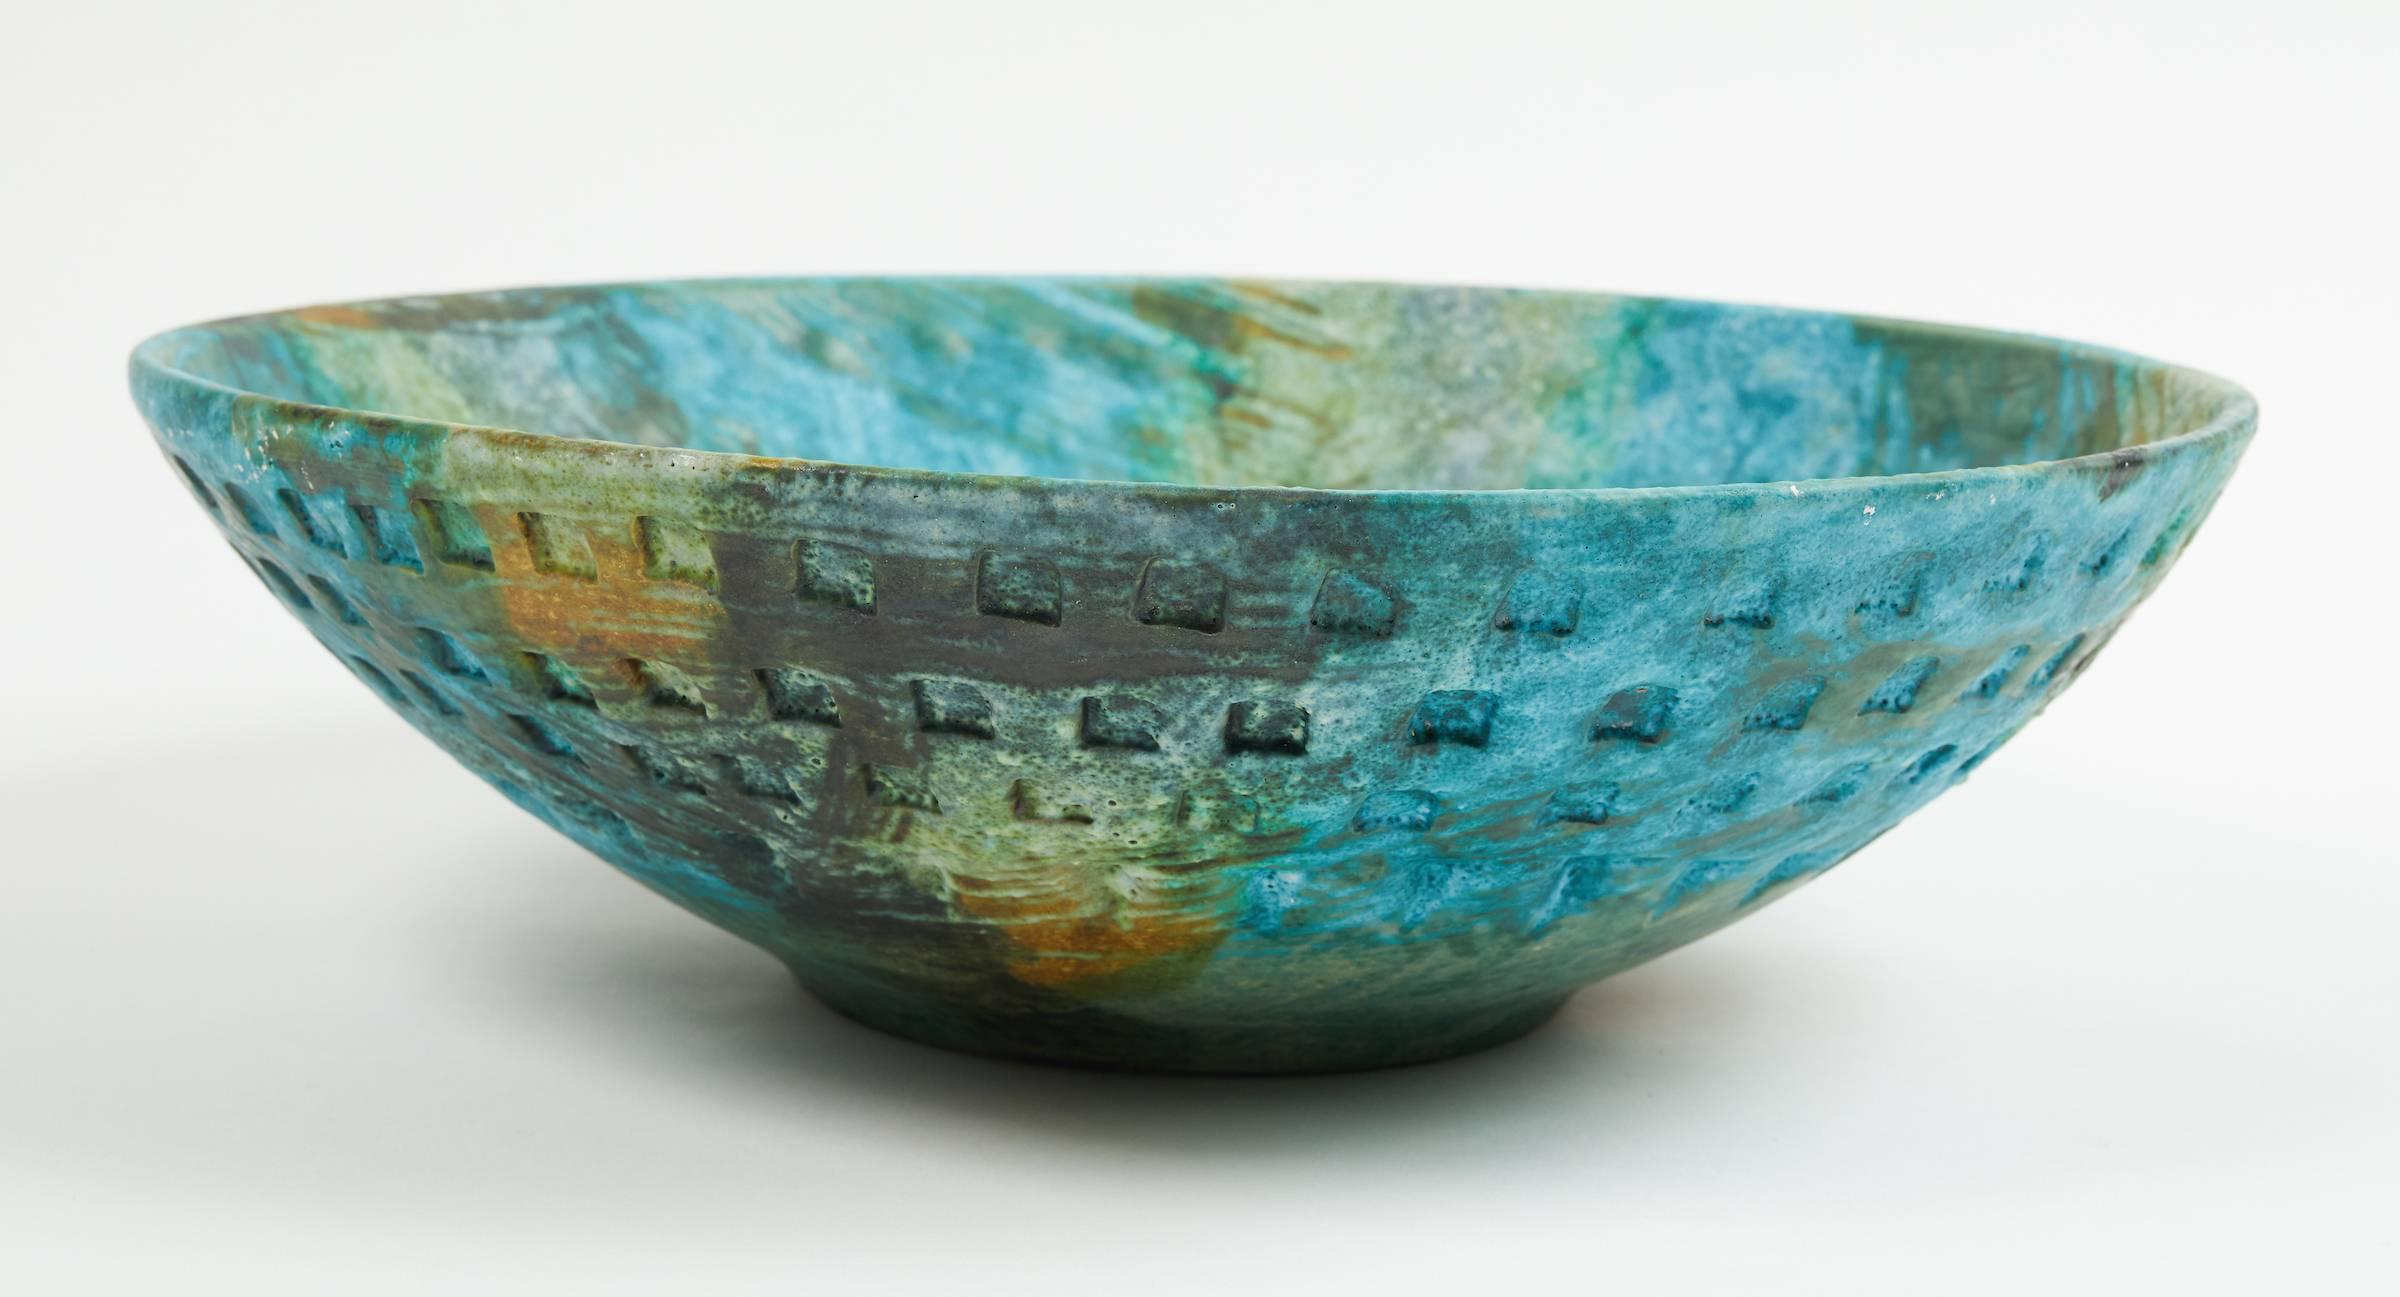 Colorful painted terracotta sea garden bowl by Alvino Bagni for Raymor. Bearing the sticker Raymor and stamped at the bottom edge 